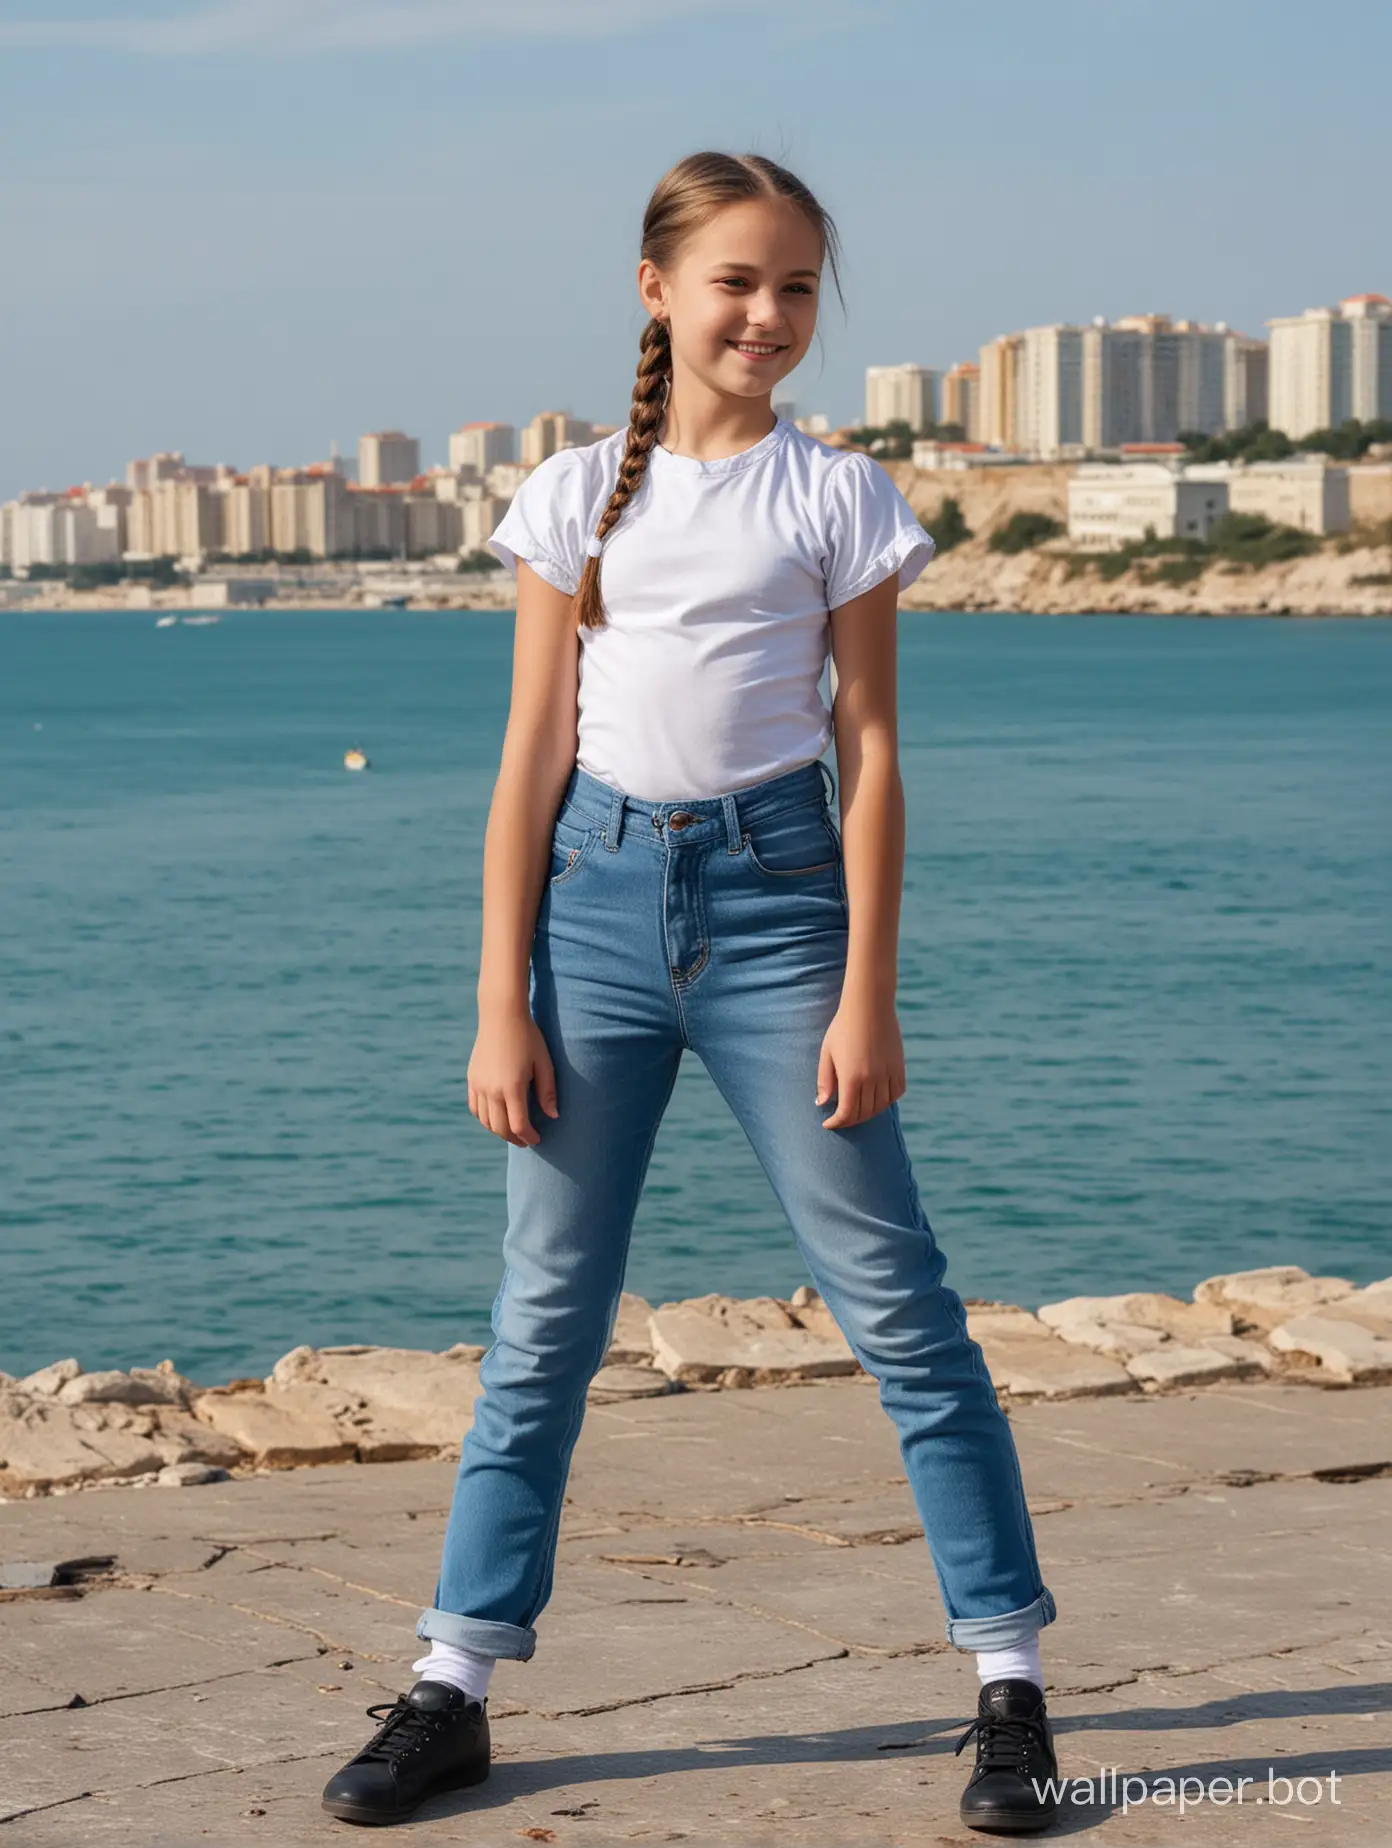 Beautiful Soviet schoolgirl 10 years old with ponytails in the Crimea against the background of the sea, in full height, dynamic poses, smile, people and buildings in the background, tight jeans, ass